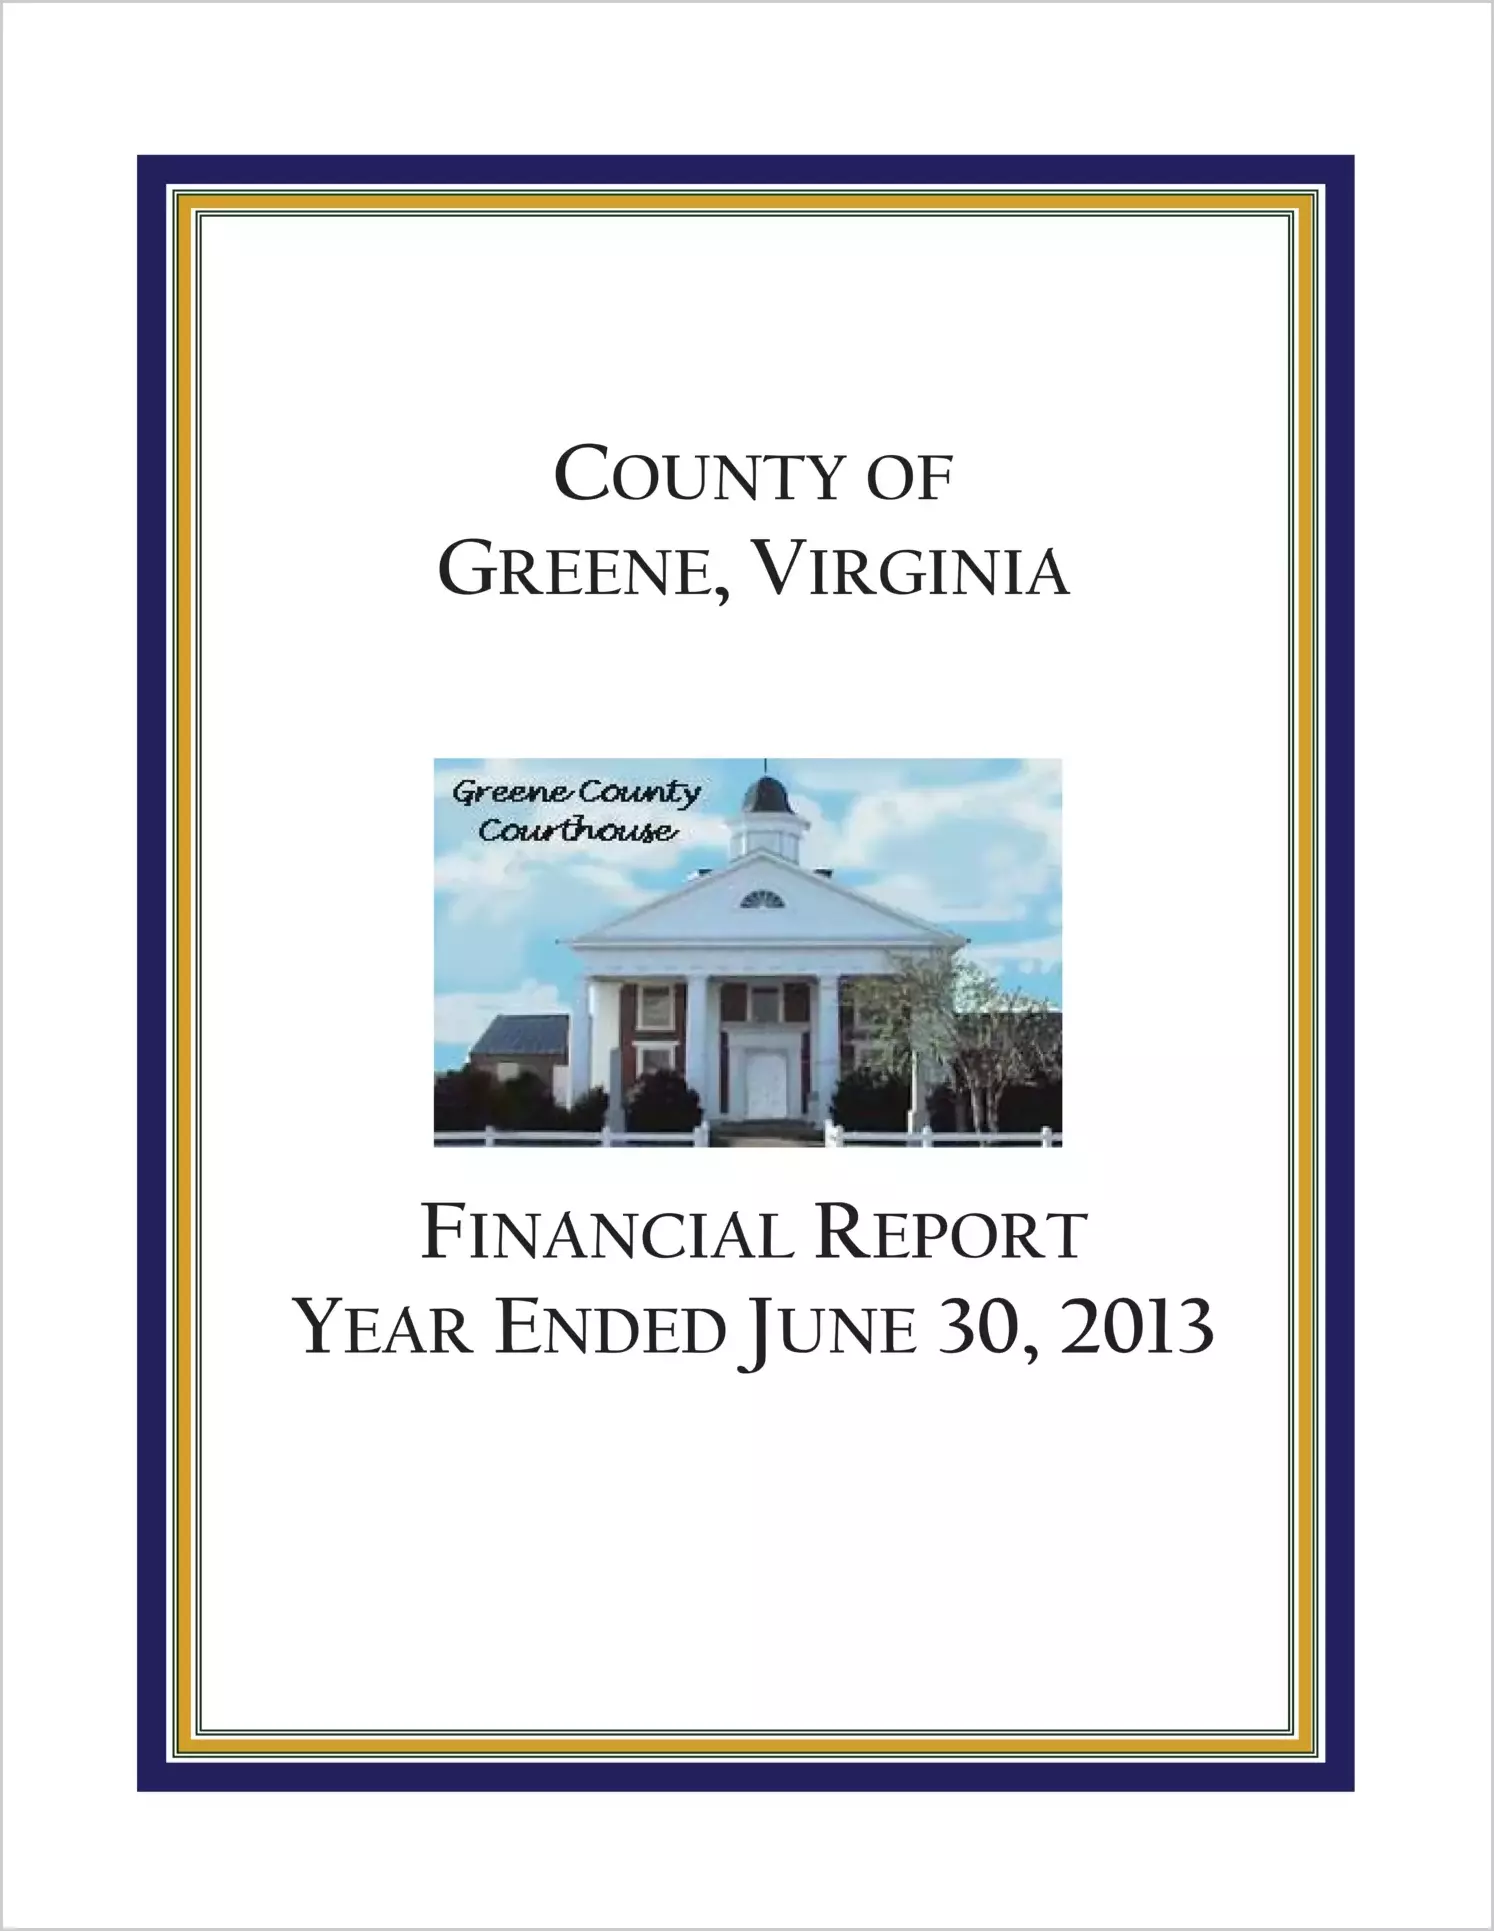 2013 Annual Financial Report for County of Greene